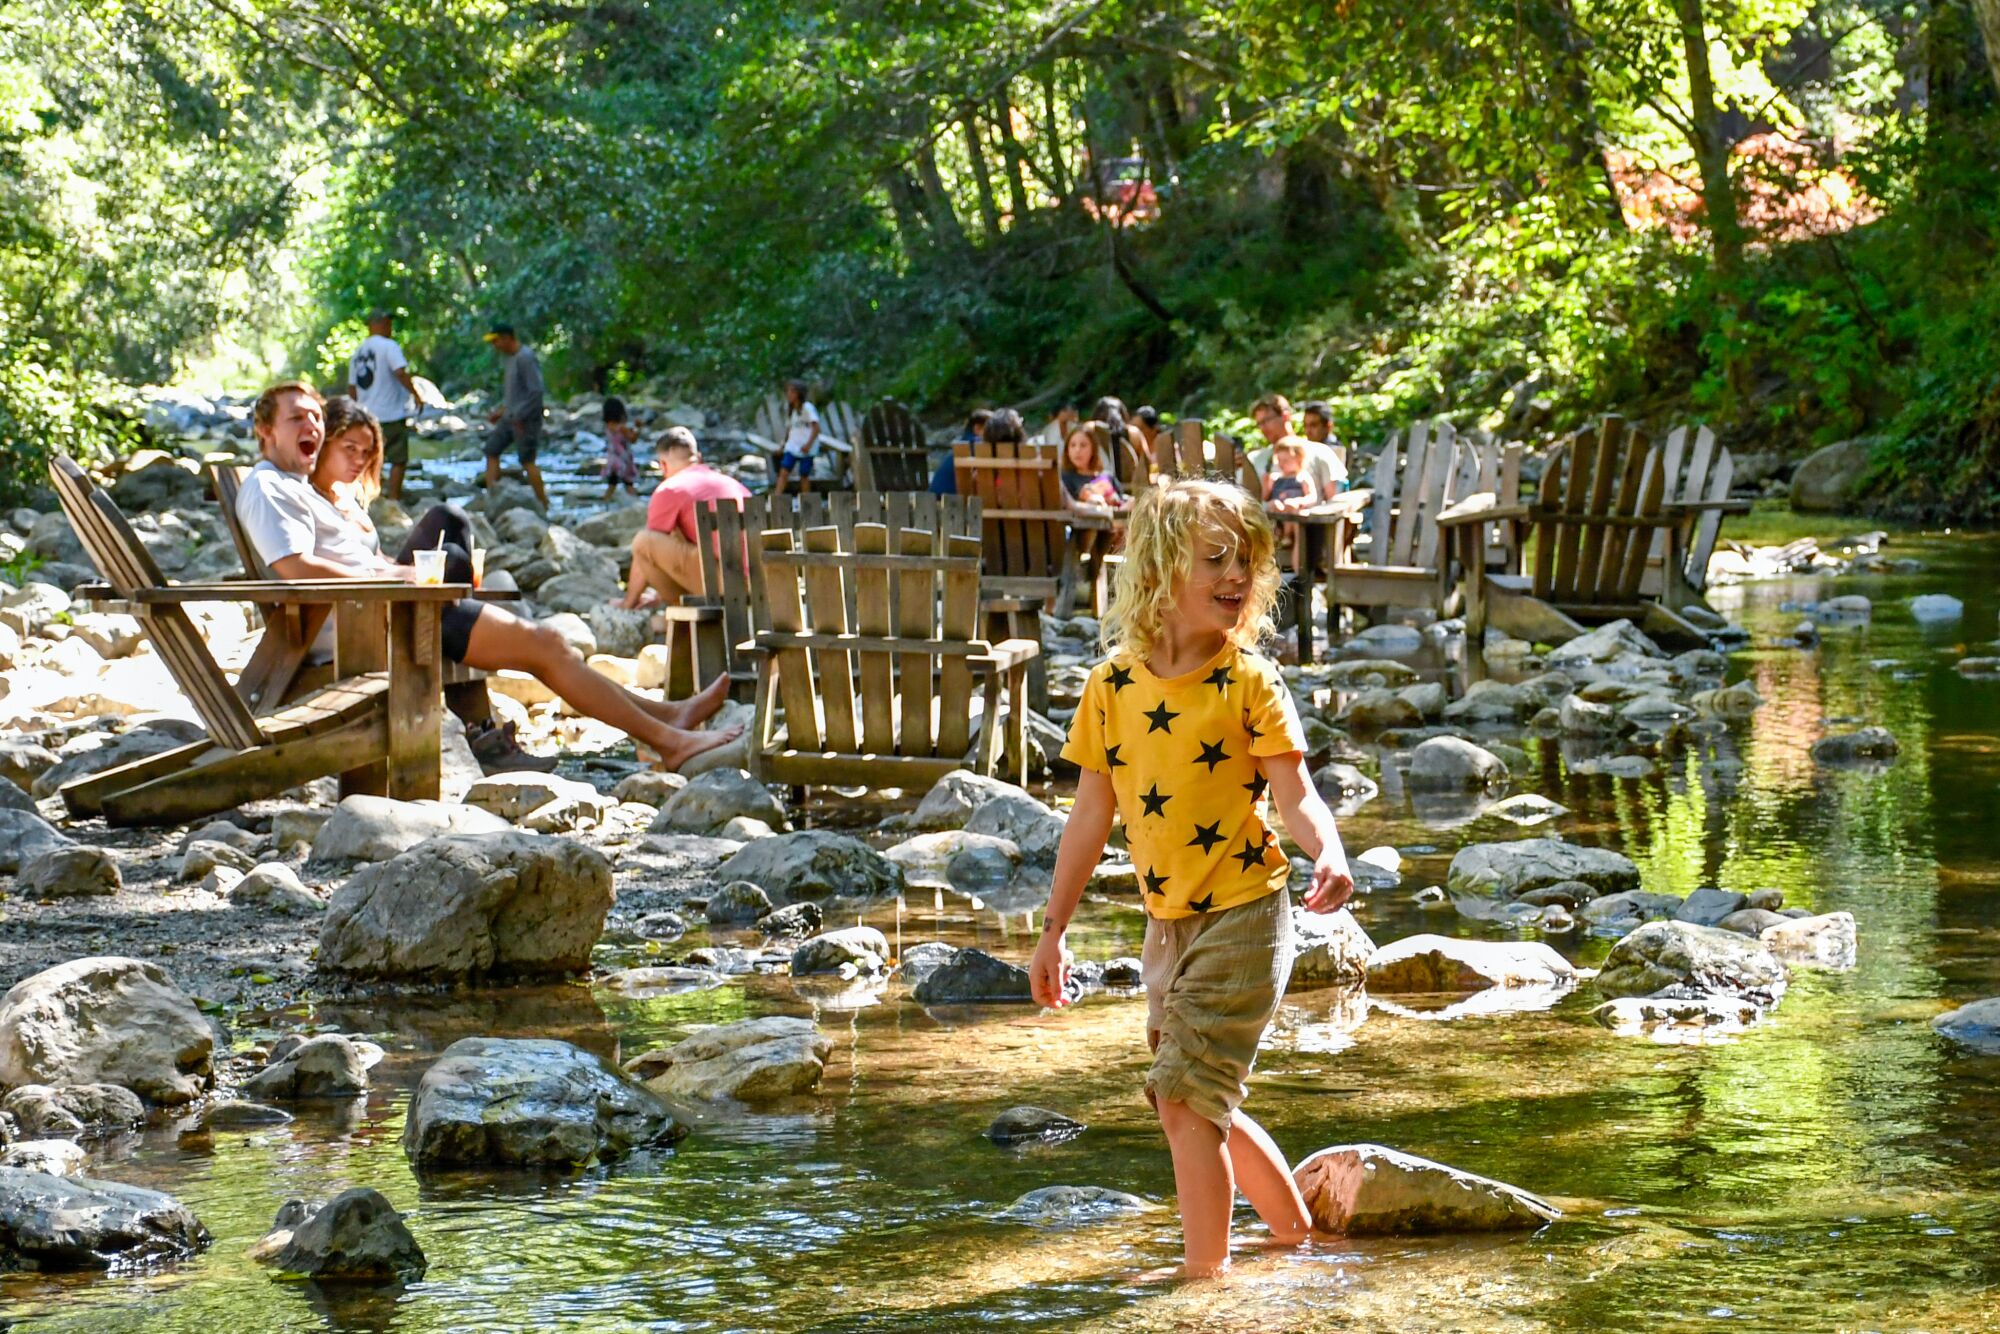 A five-year-old stands ankle-deep in a river, while adults in the background sit in Adirondack chairs, also in the river.